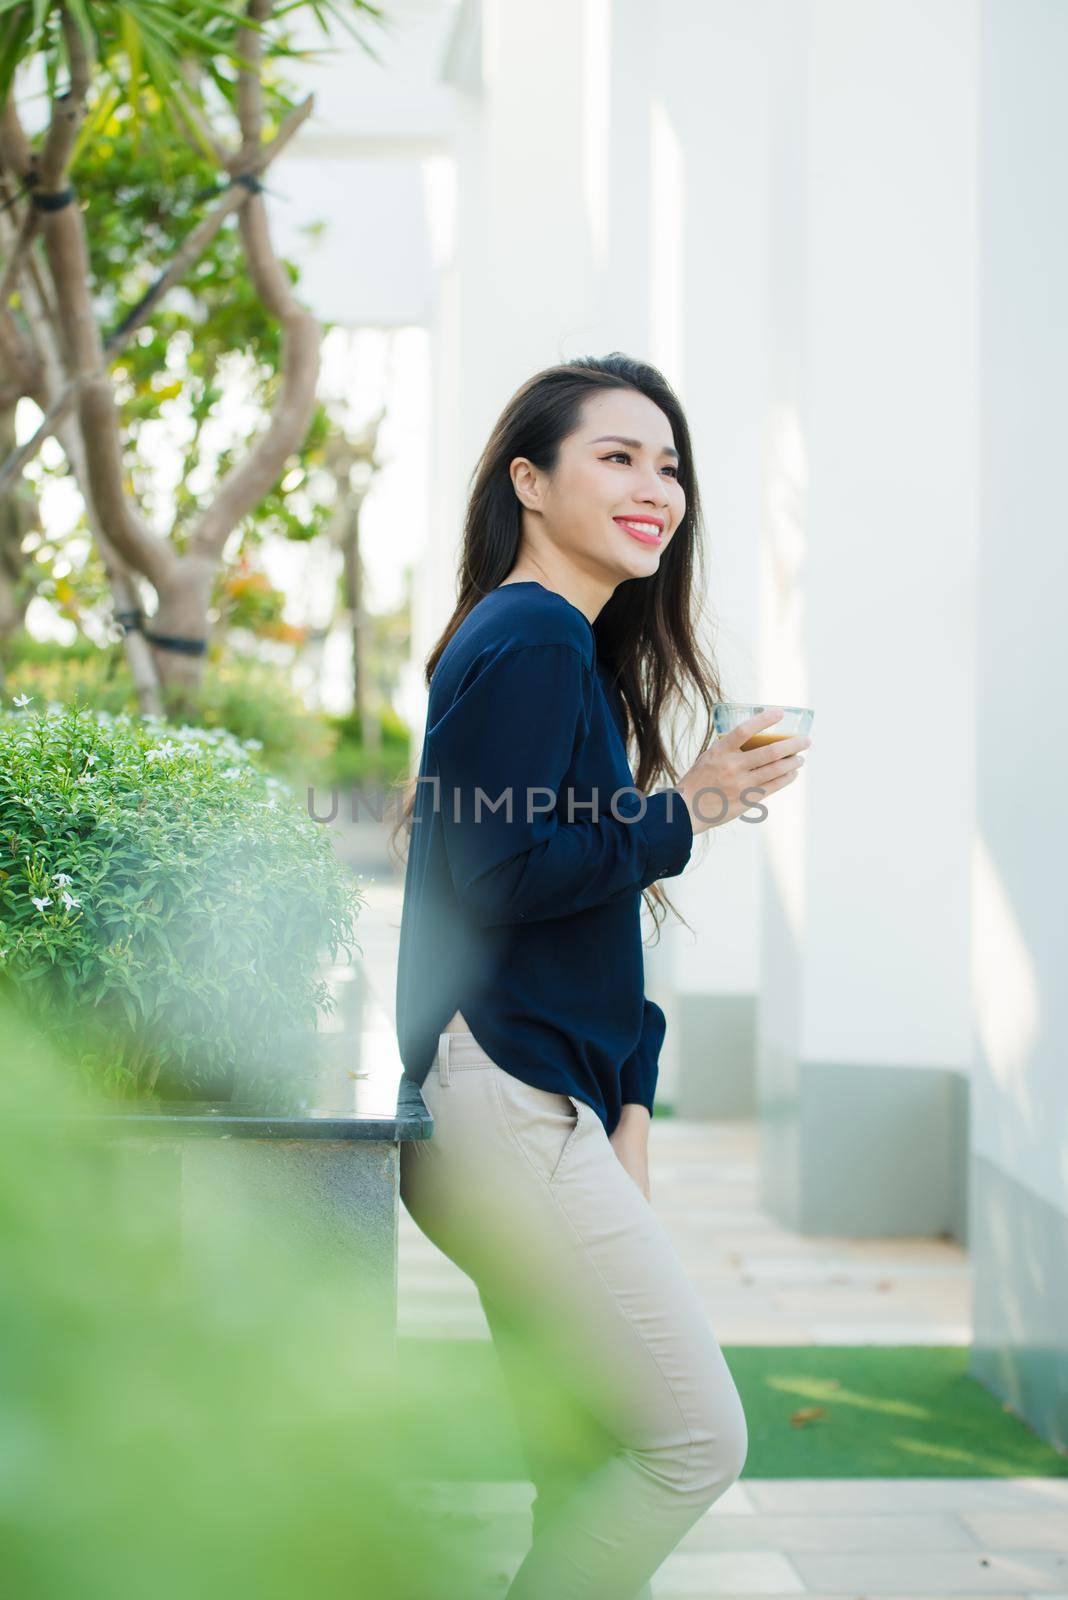 Summer terrace. Woman feeling very relaxed with hand holding glass of coffee while standing on summer terrace 